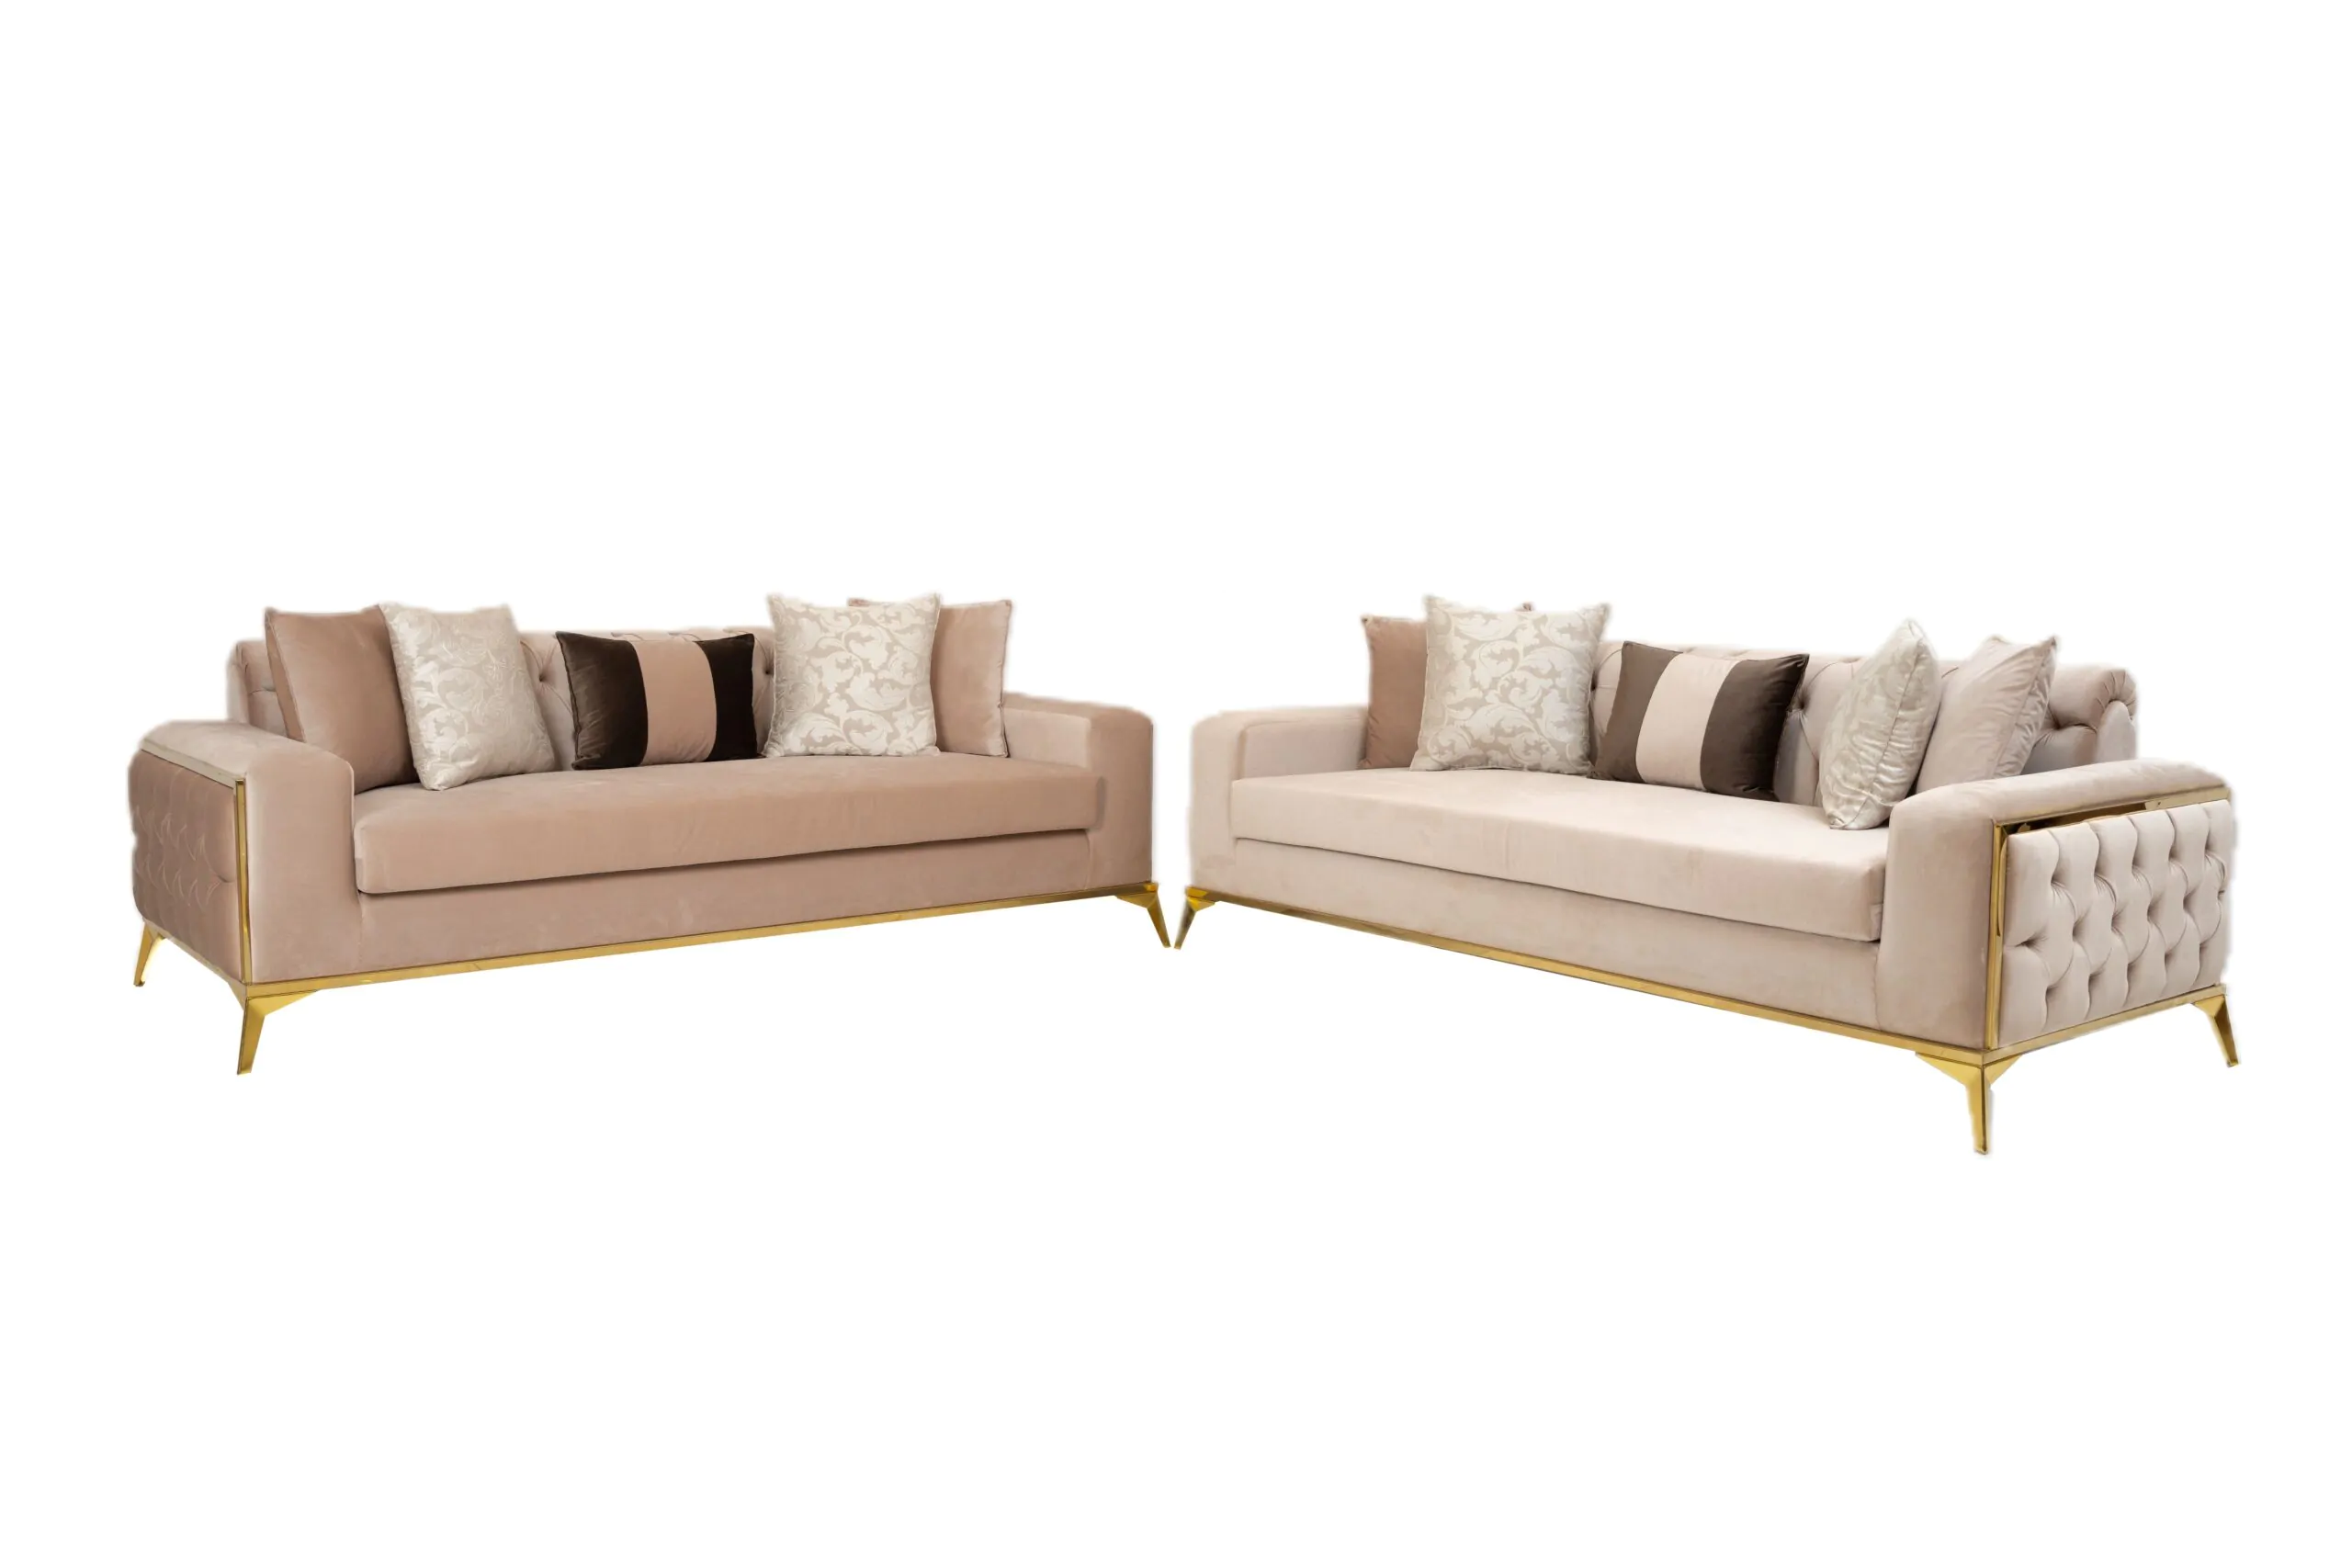 Brass Line Sofa – A Perfect Blend of Elegance and Comfort